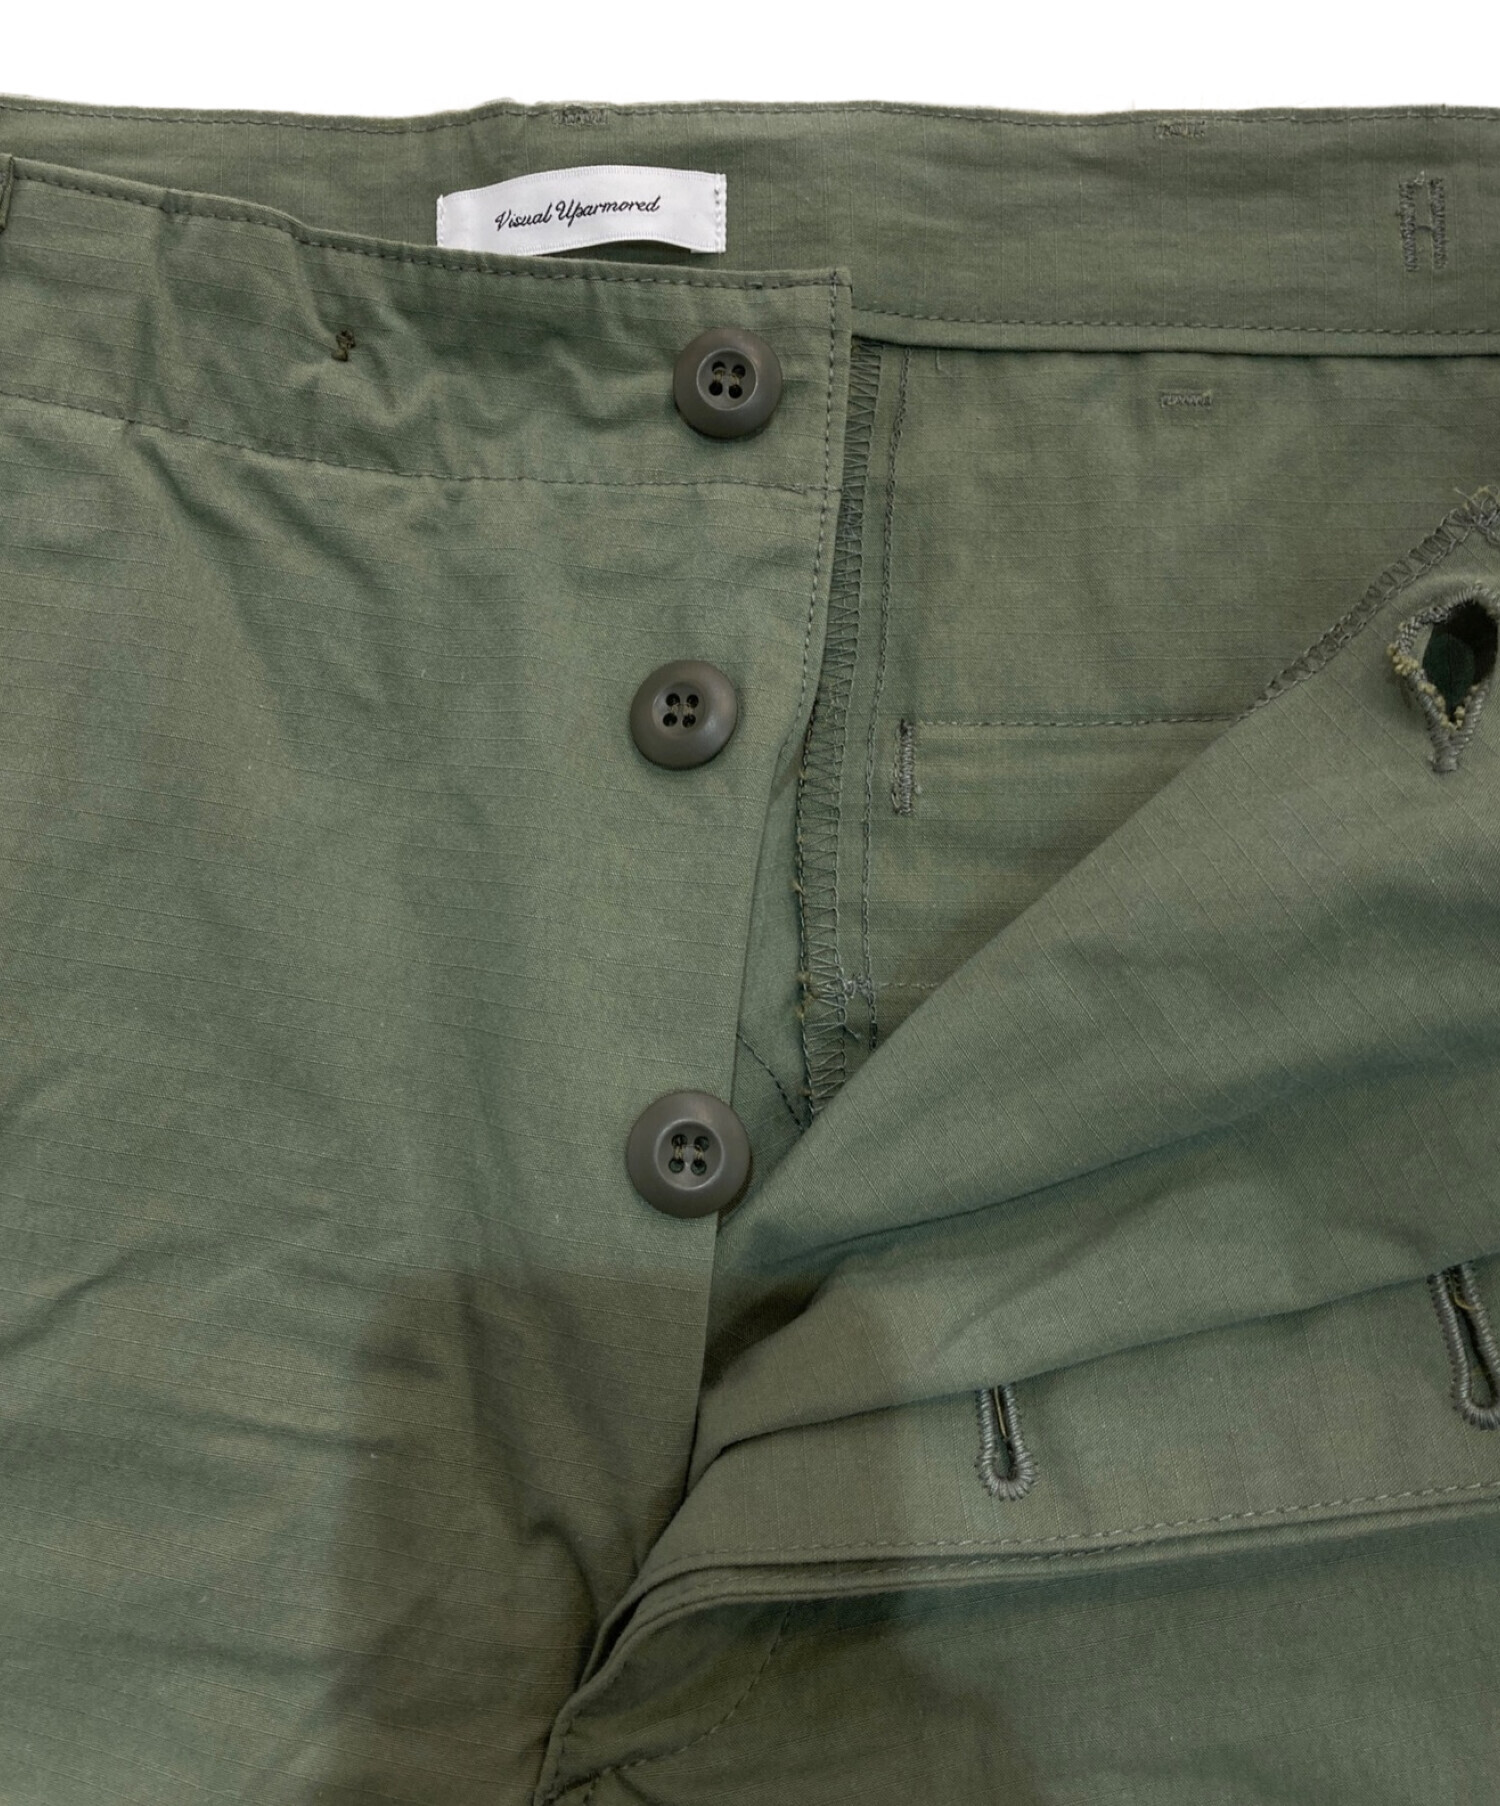 WTAPS (ダブルタップス) WMILL-TROUSER 01　22SS TROUSERS/NYCO.RIPSTOP　WVDT-PTM01　 リップストップカーゴトラウザー オリーブ サイズ:4